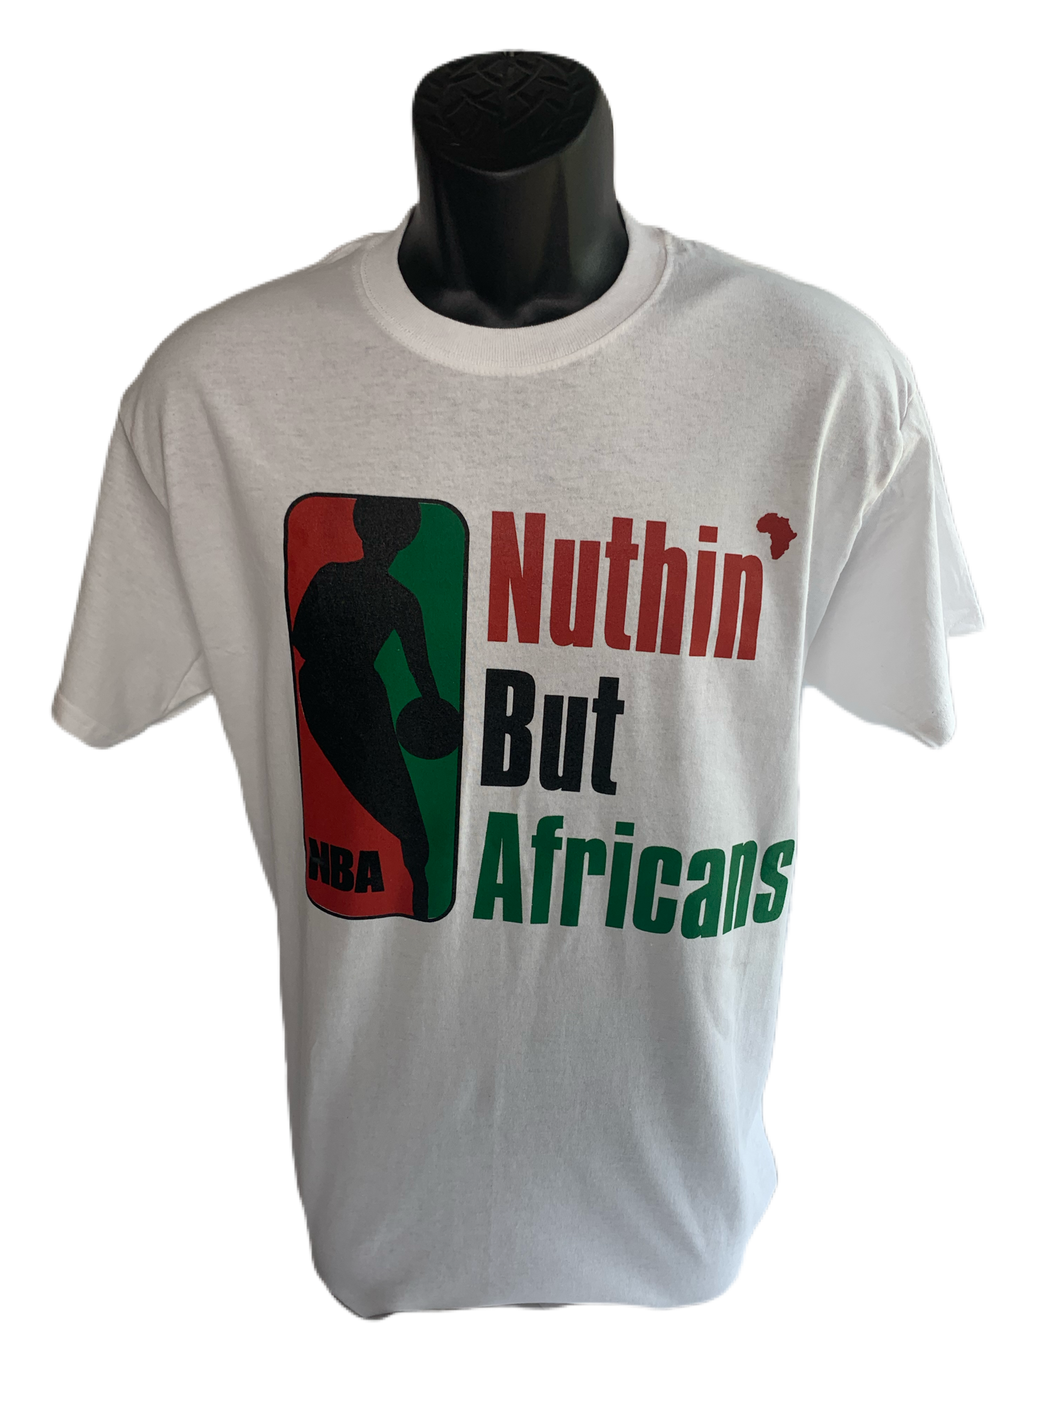 Nuthin' But Africans